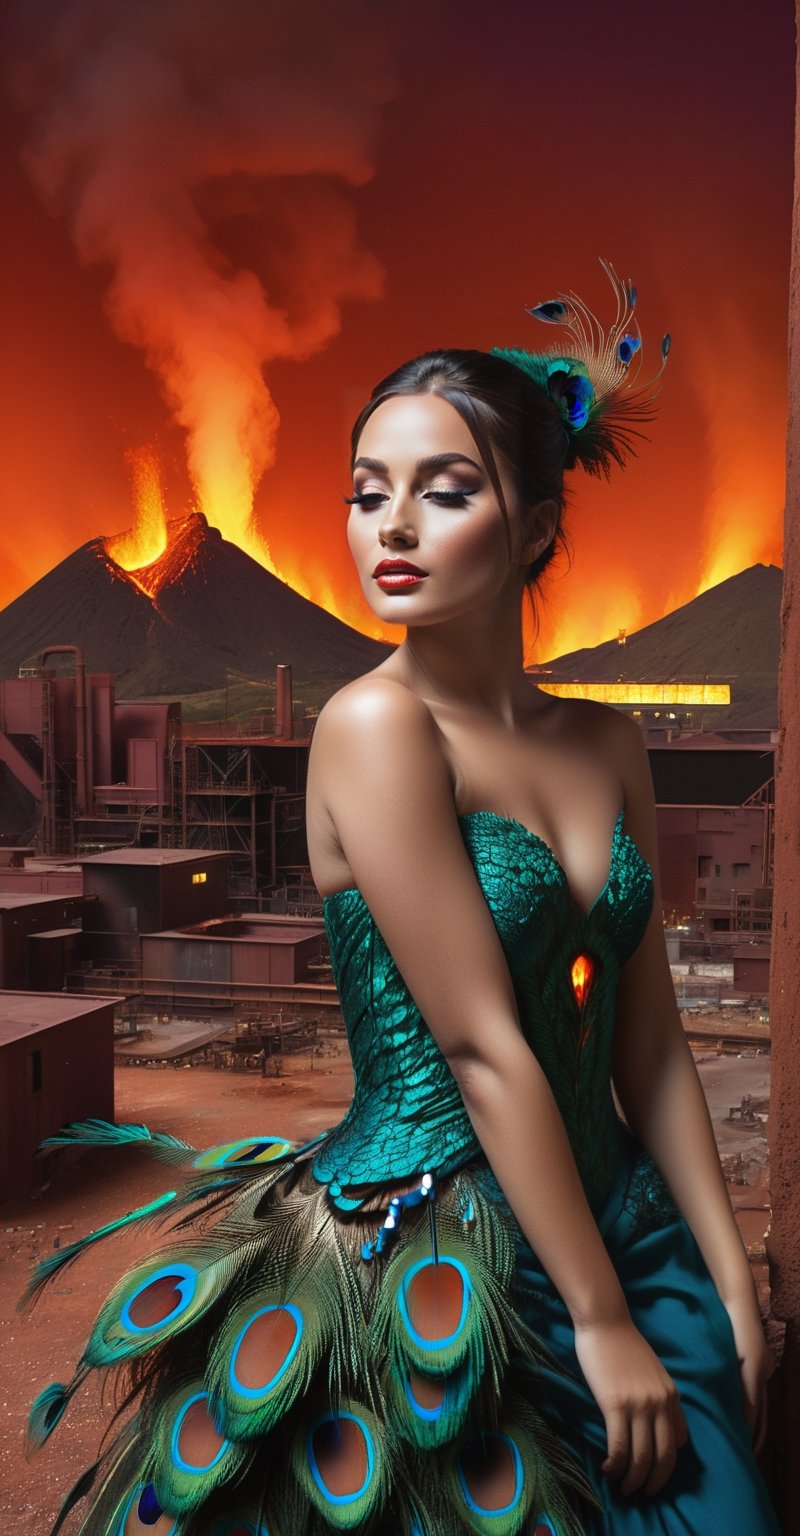 A youthful girl's form slowly contorts and expands, feathers sprouting from her arms and torso as she morphs into a majestic peacock. Against a rich, volcanic backdrop of crimson and burnt orange hues, the Alboca glass manufacturing facility hums in the background. Gigapascal pressure vessels glow with an eerie uranium green light, casting an otherworldly ambiance on the scene. The raw, photorealistic depiction captures the surreal moment with unflinching accuracy.,Illustration,Sexy Toon,facial expression